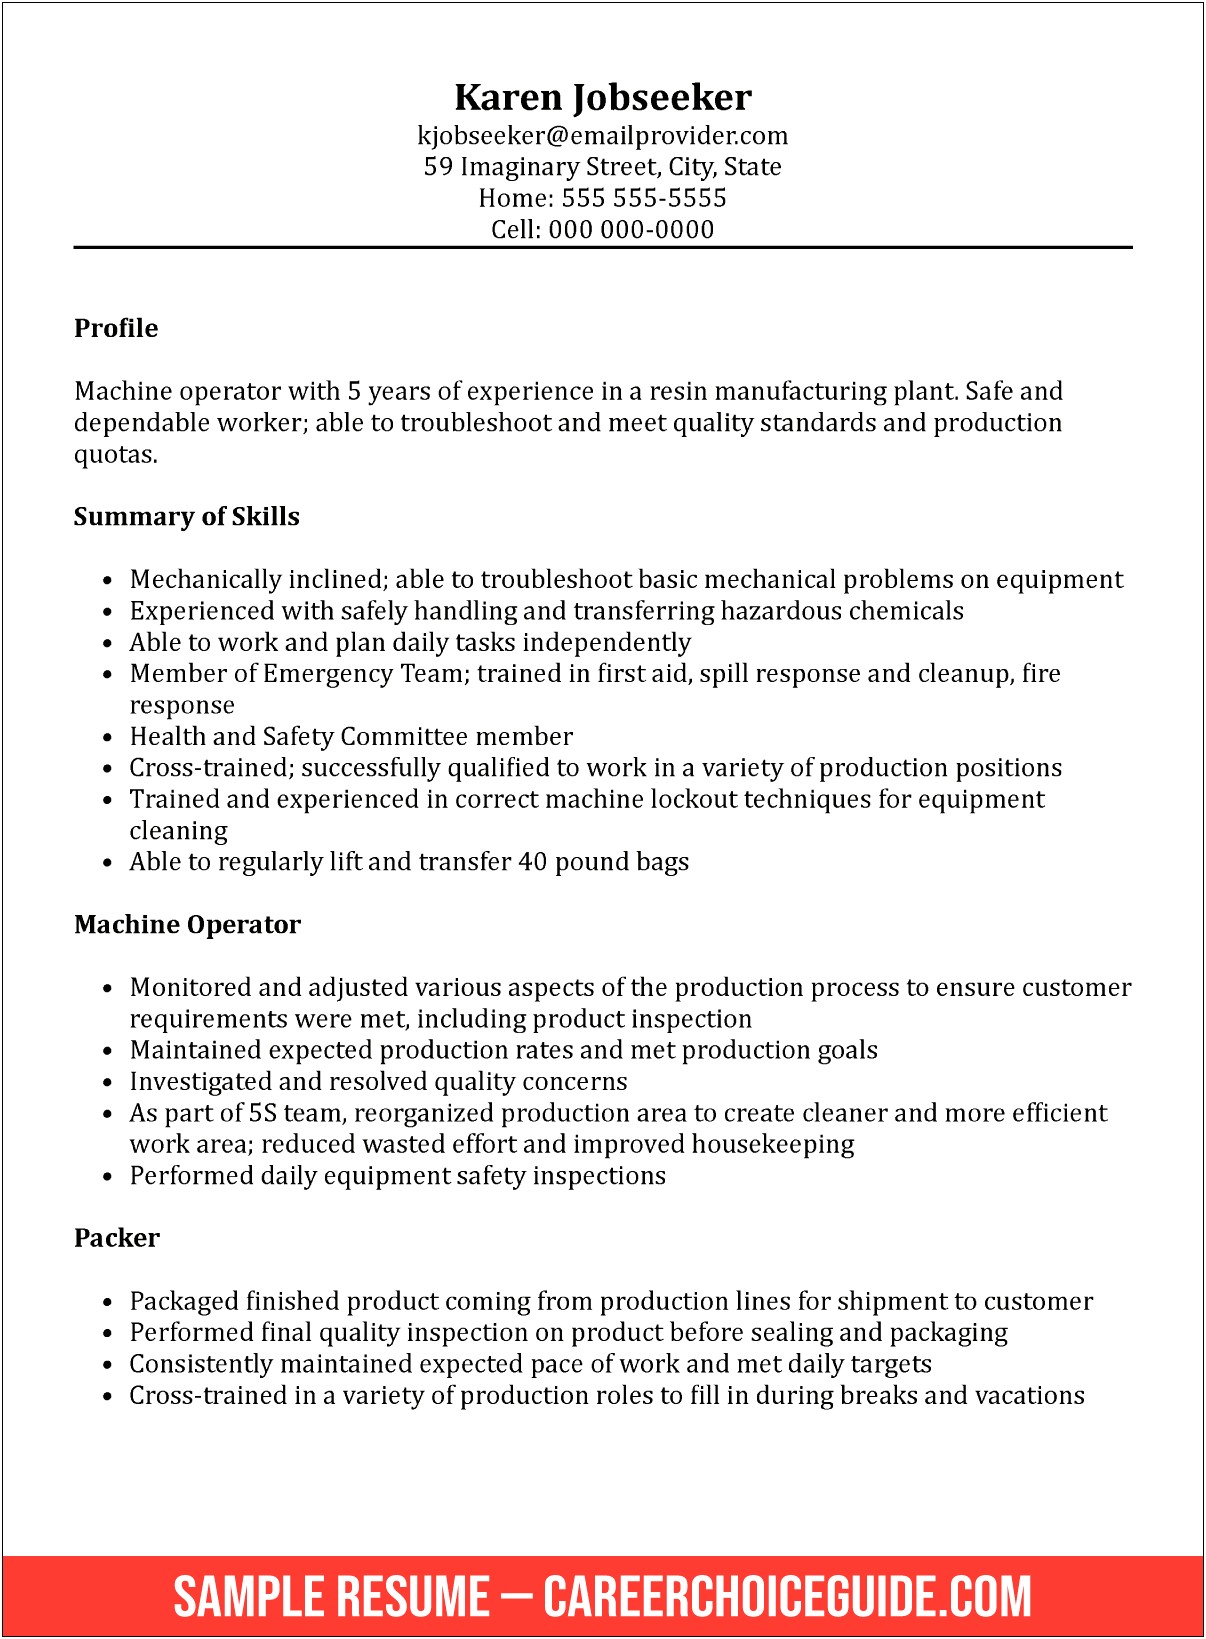 A Good Functional Summary On A Resume